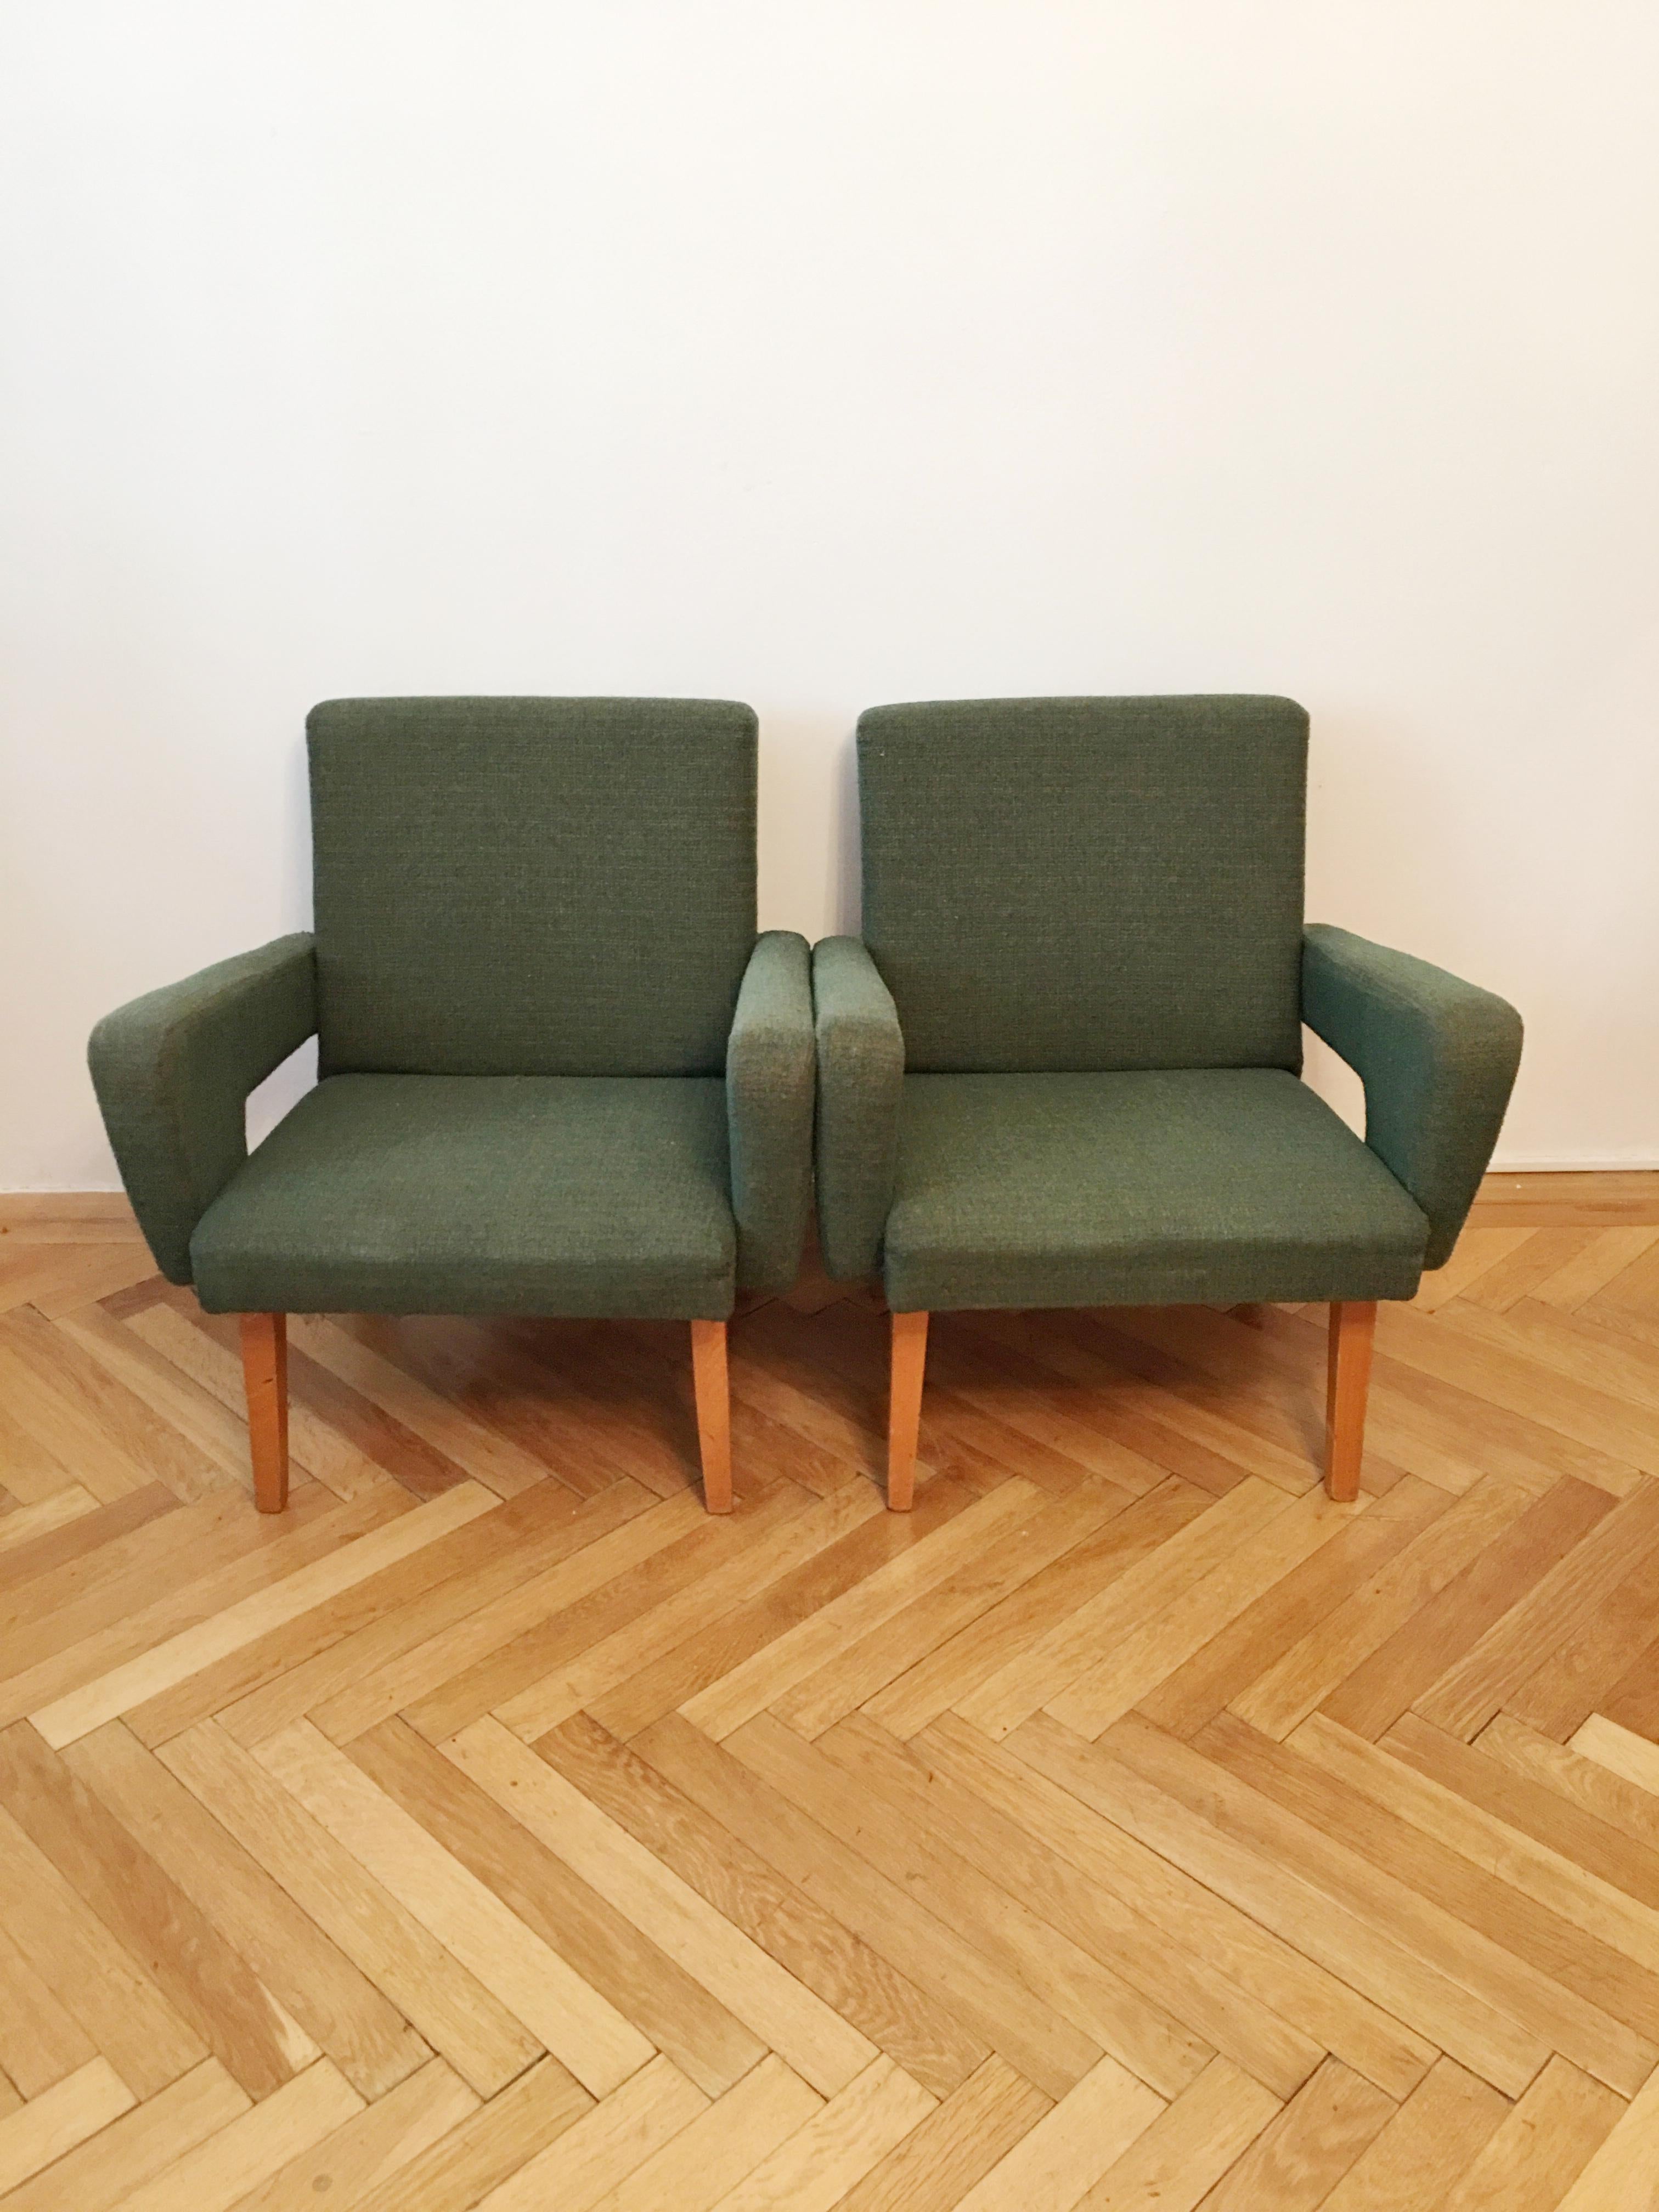 These armchairs were made in Czechoslovakia in the 1960s and produced by Jitona company.
2 pieces
Measures: H 72 cm x W 64 cm x D 60 cm.